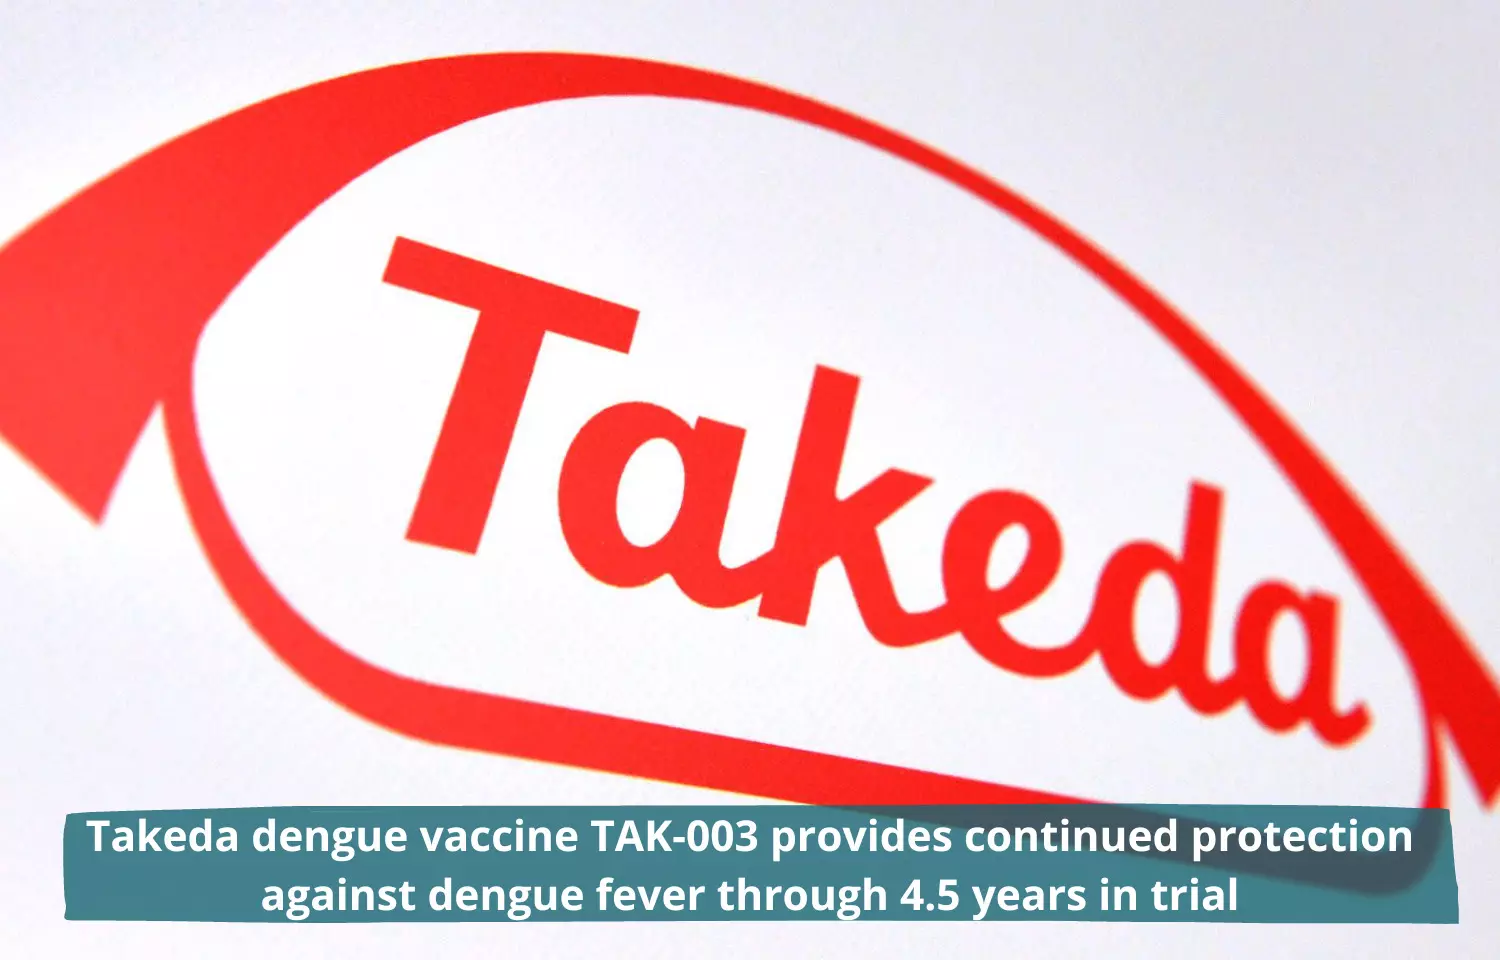 Takeda dengue vaccine TAK-003 provides continued protection against dengue fever through 4.5 years in trial